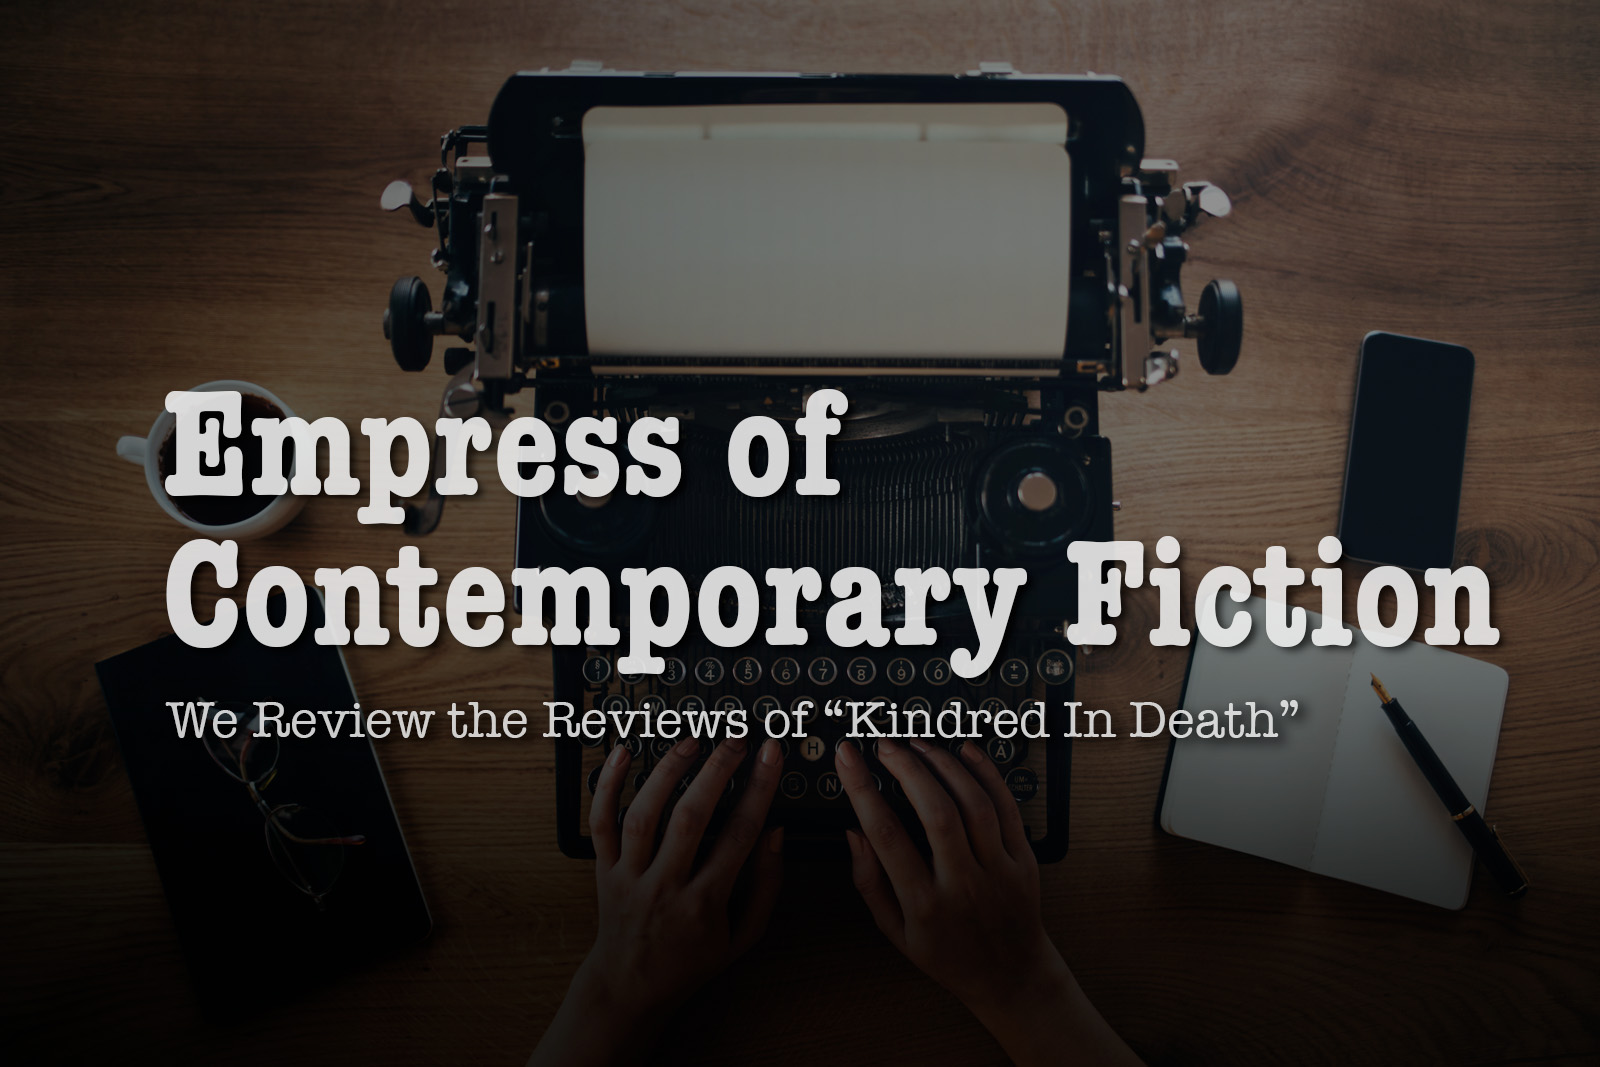 Empress of Contemporary Fiction – We Review the Reviews of “Kindred in Death”